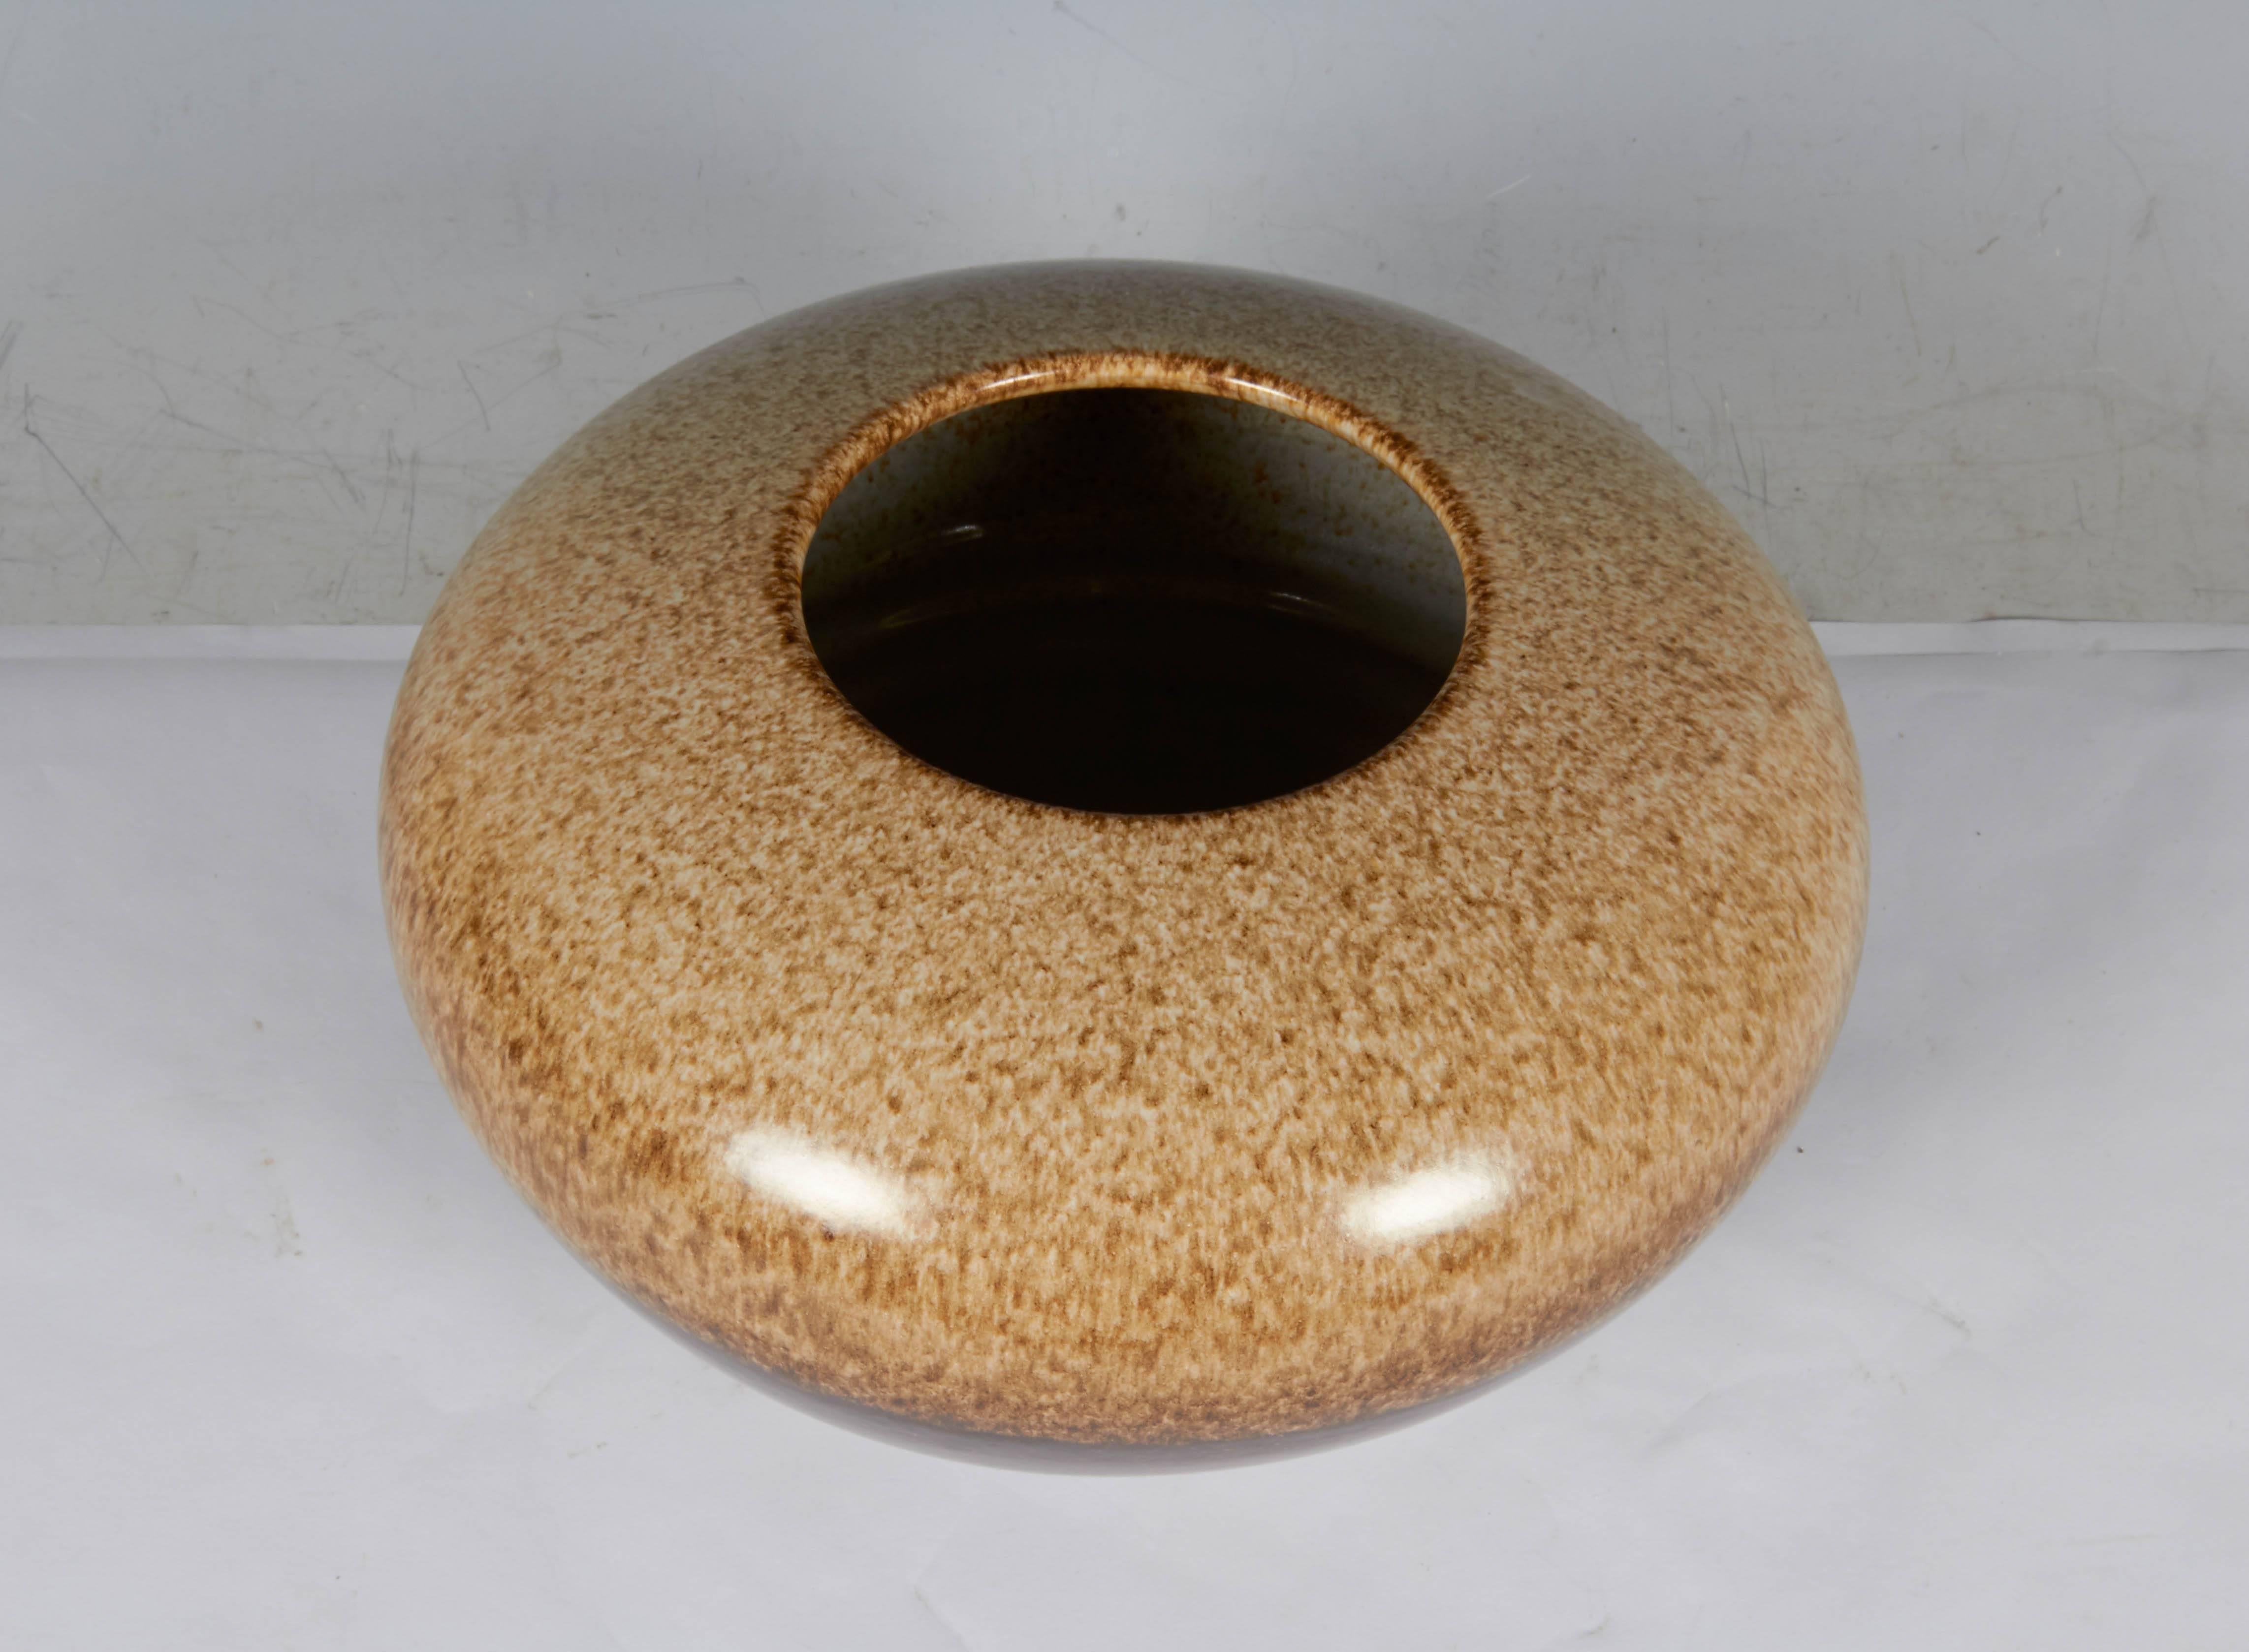 A round ceramic vase by Italian designer Alvino Bagni for Raymor, produced circa 1960s, with mottled two-tone glaze, in beige and brown. Marks include original Raymor label, with codes [4440 BAH/4440 BAG]. Very good condition, consistent with age